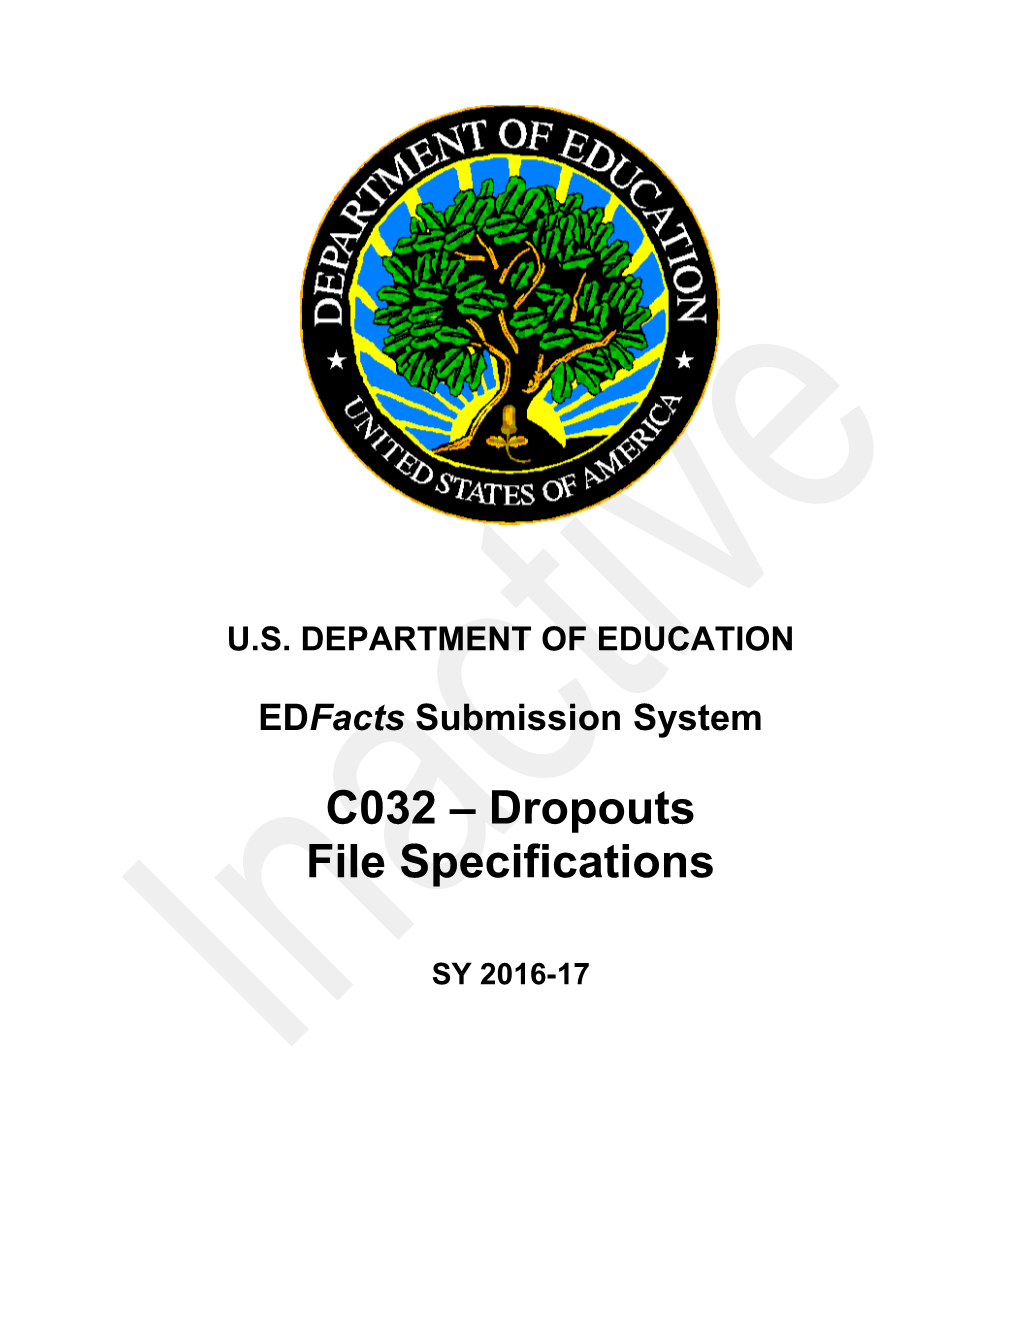 Dropouts File Specifications (MS Word)